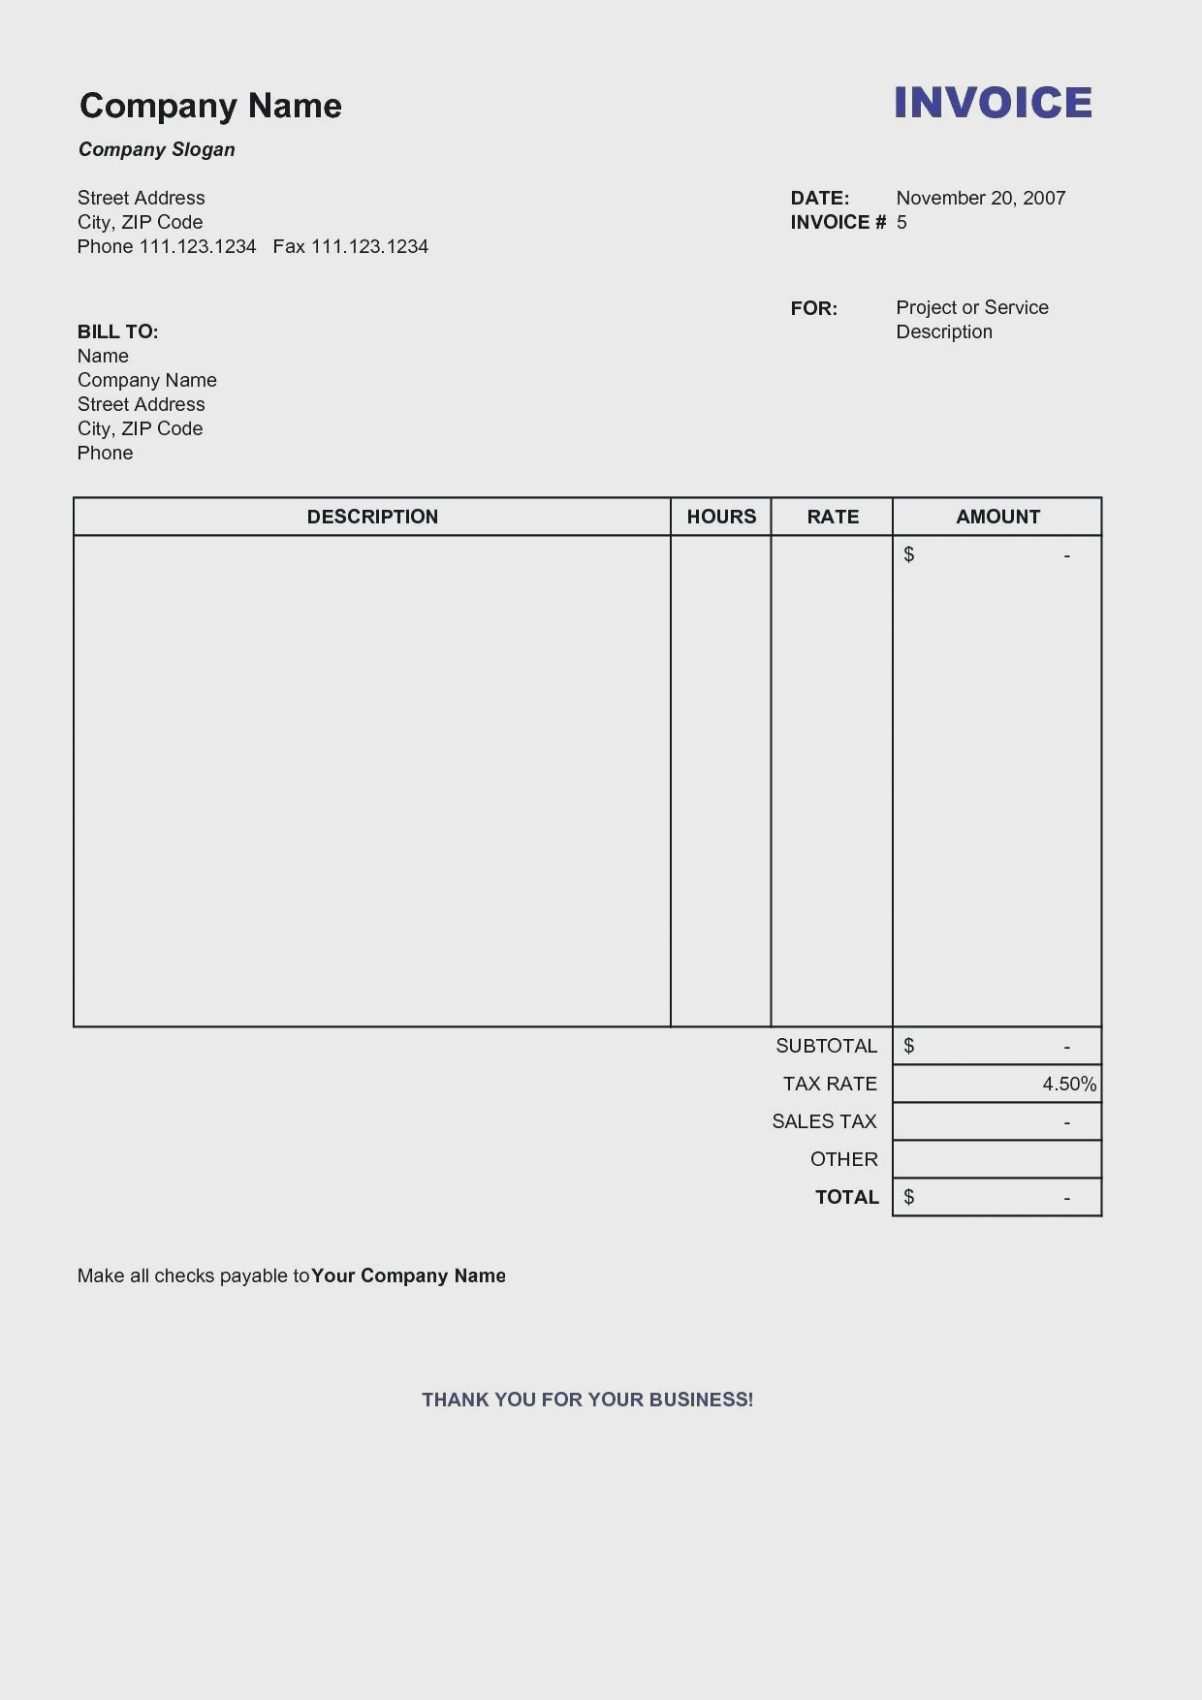 Consulting Invoice Template from legaldbol.com